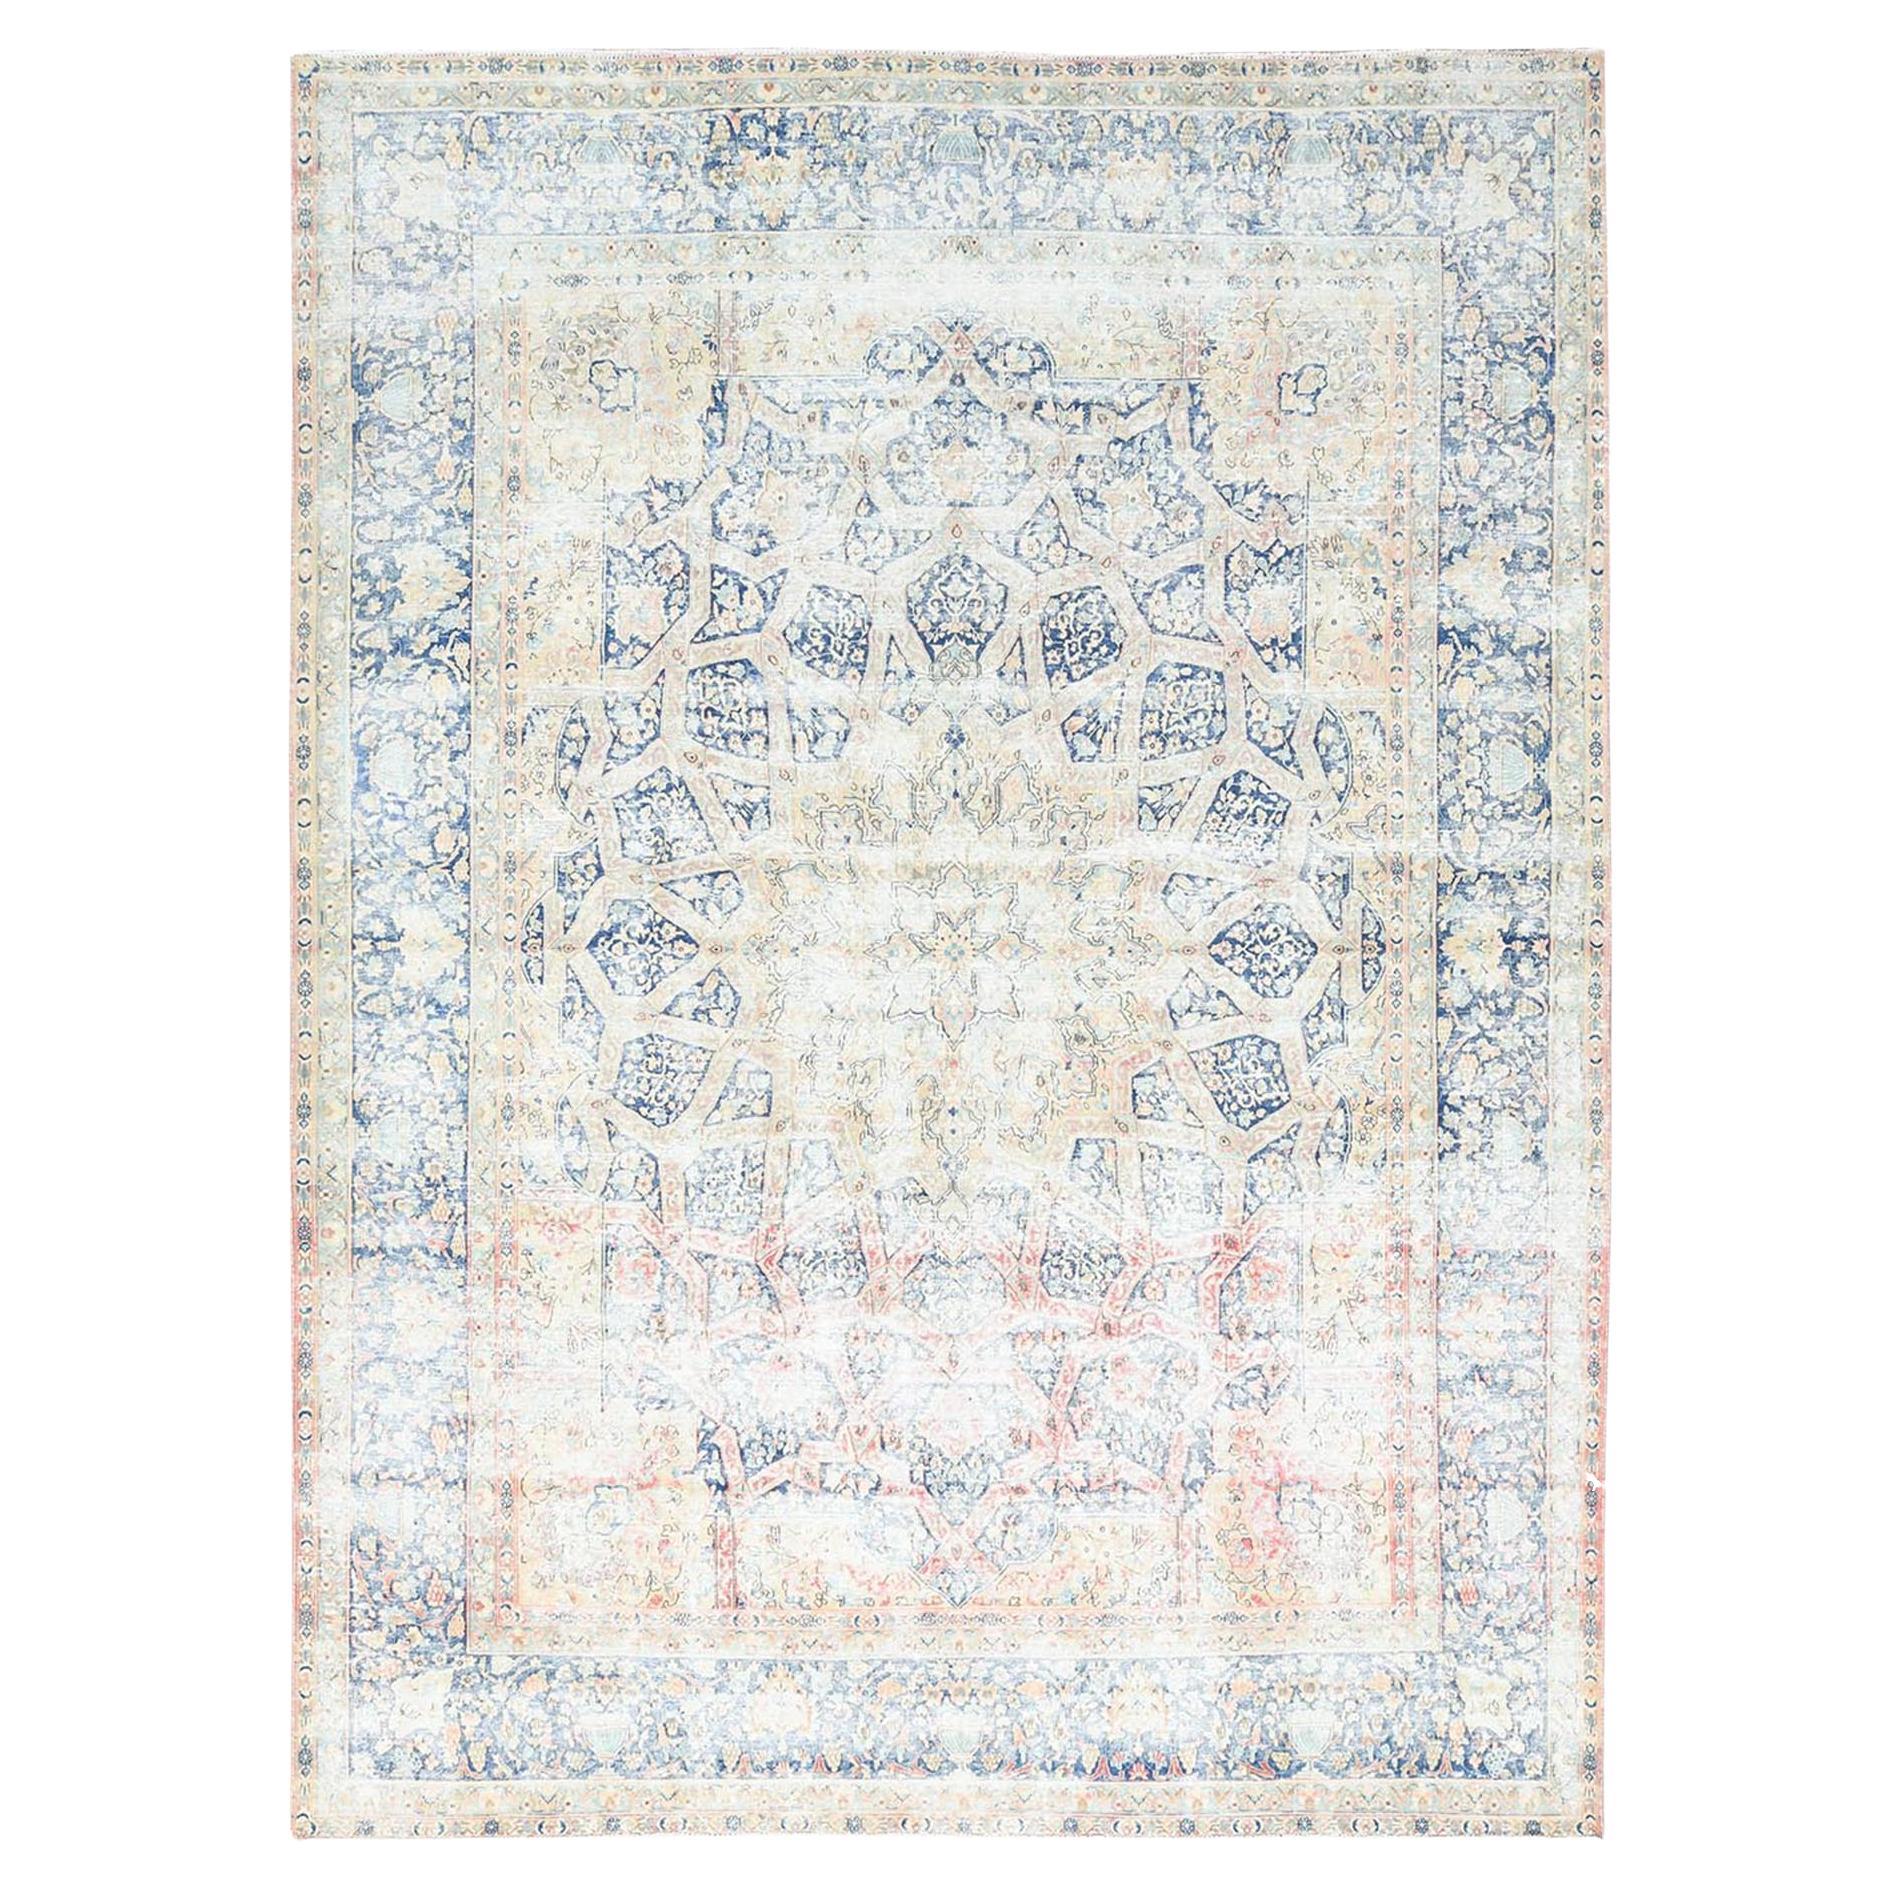 Elfenbein Vintage Persian Kerman Washed Out Hand Knotted Soft Wool Evenly Worn Rug im Angebot